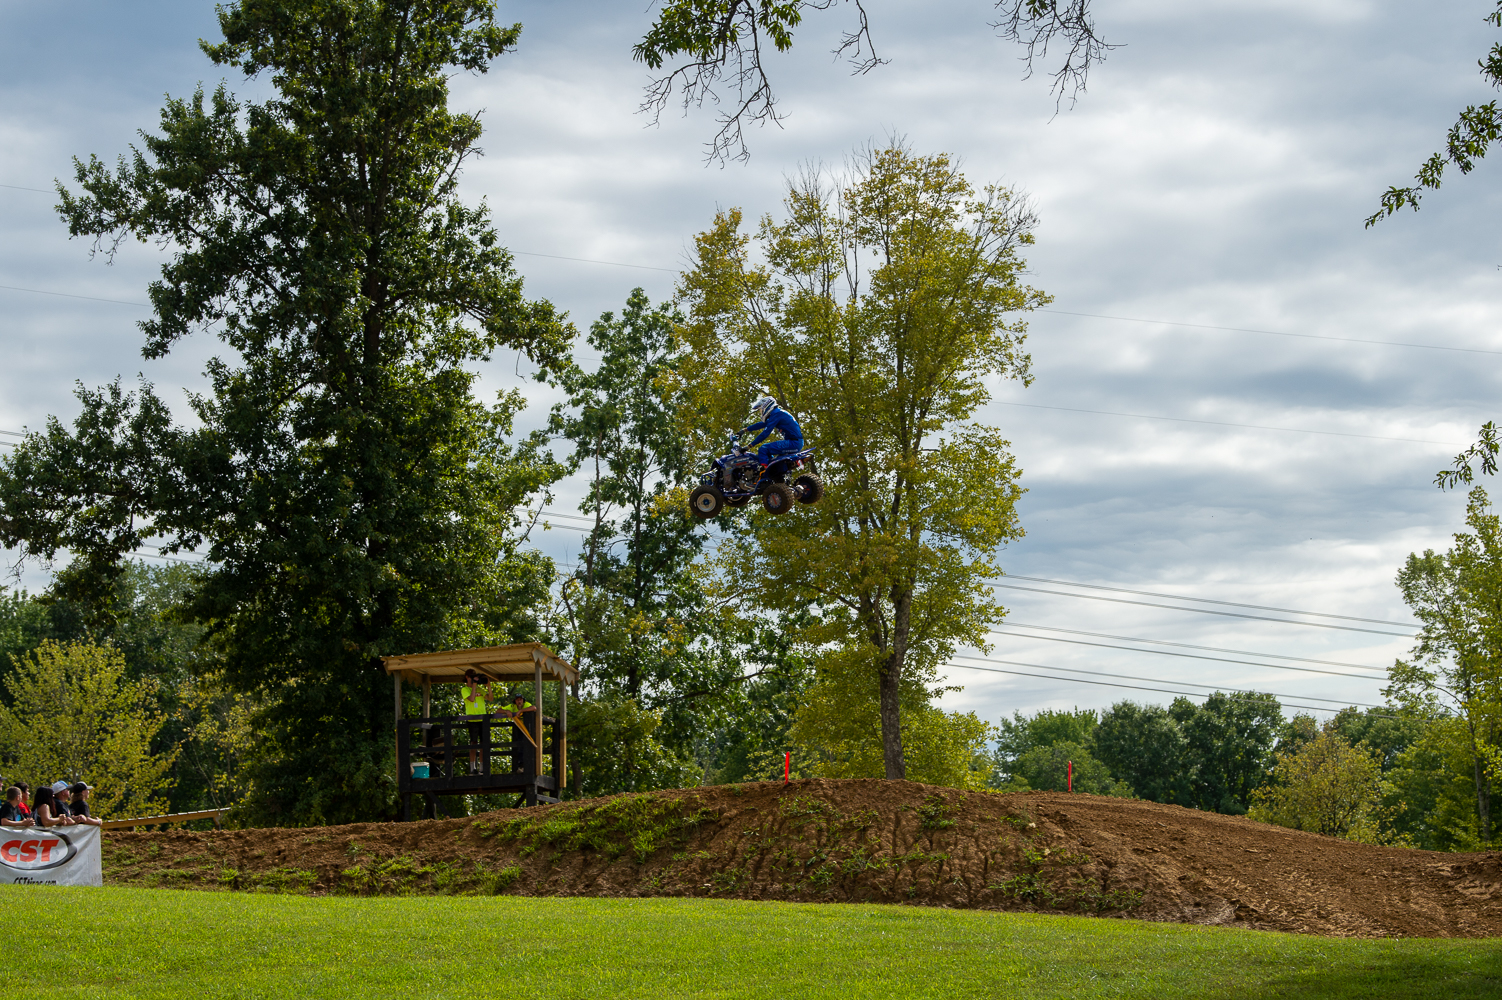 Wienen soars over the course at ATV MX Briarcliff